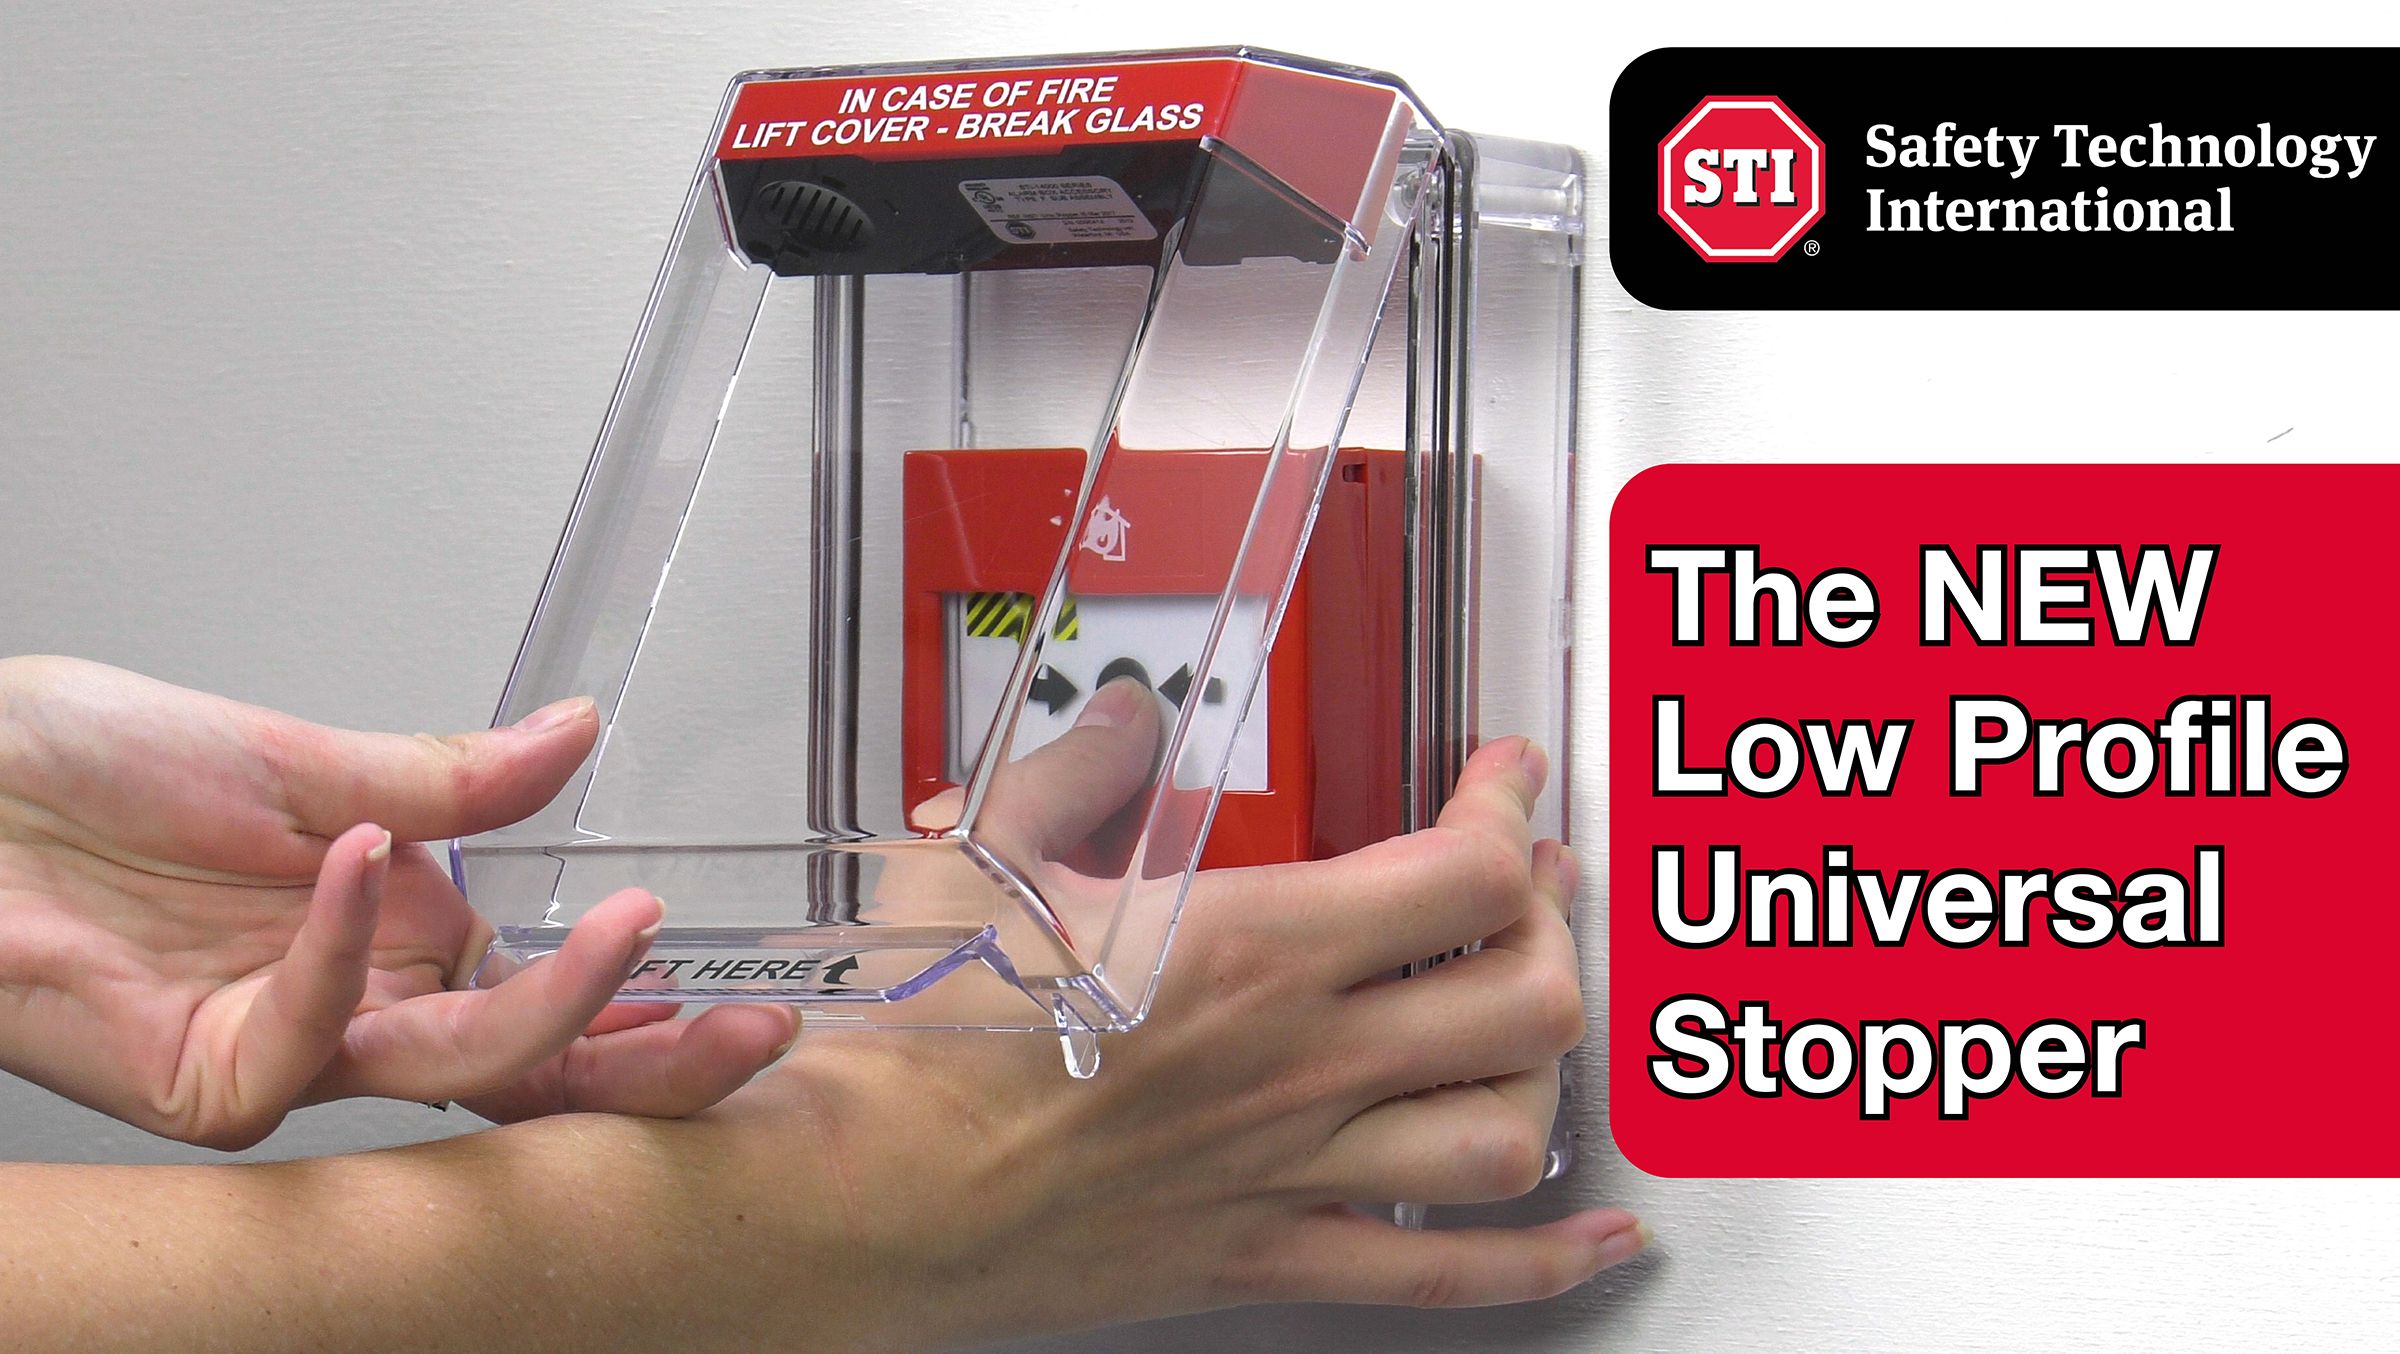 Cut the cost of false alarms with the NEW Low Profile Universal Stopper®